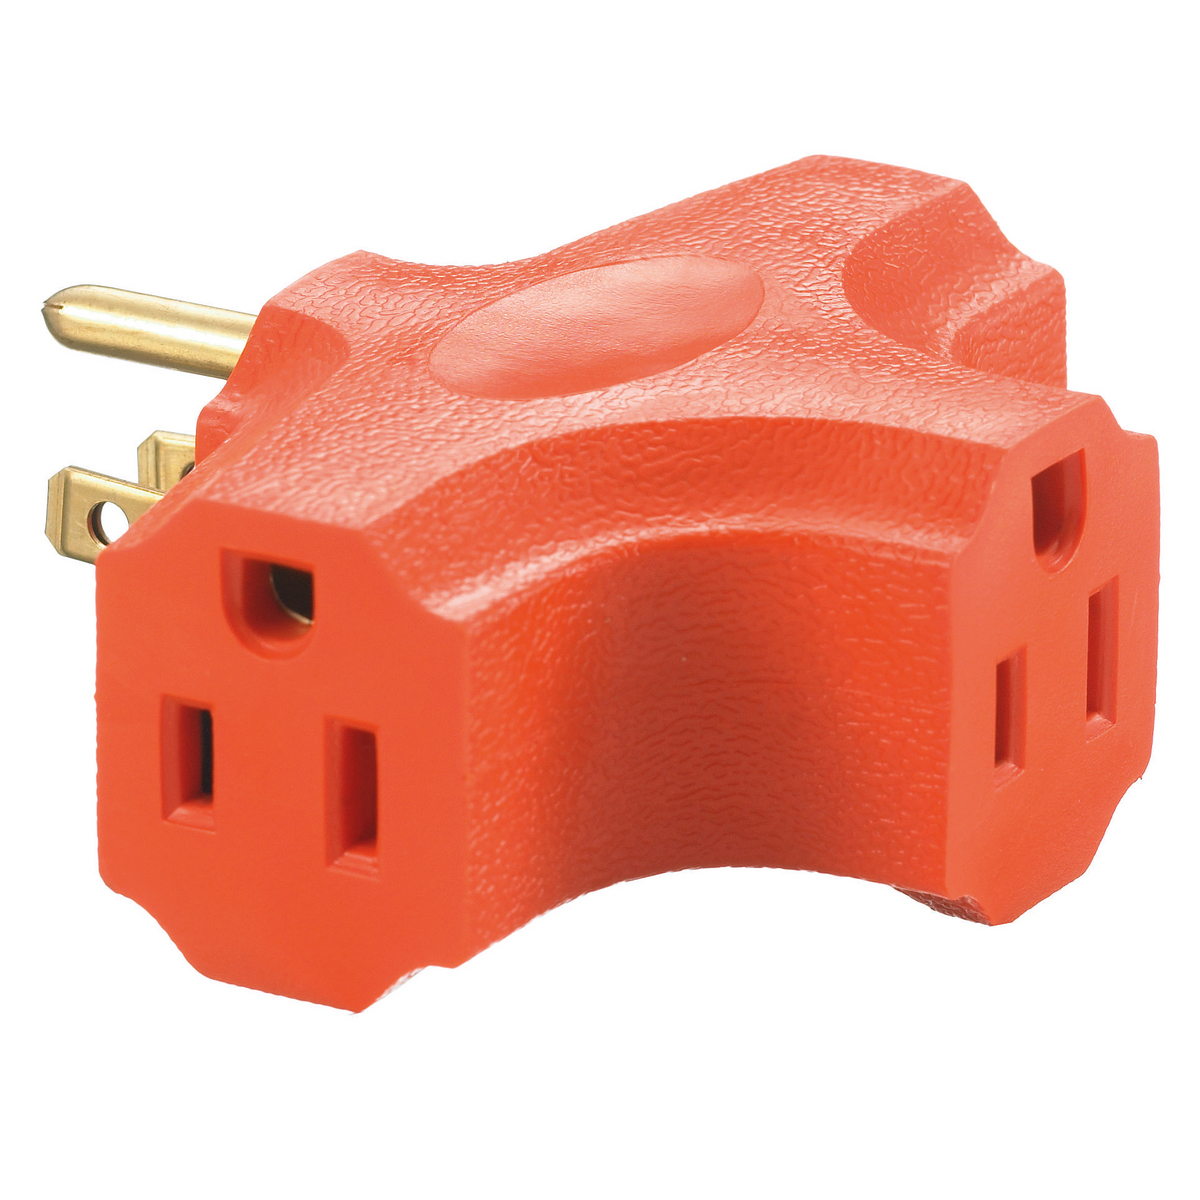 Woods(R) Outlet Adapter for Gas Range 548303